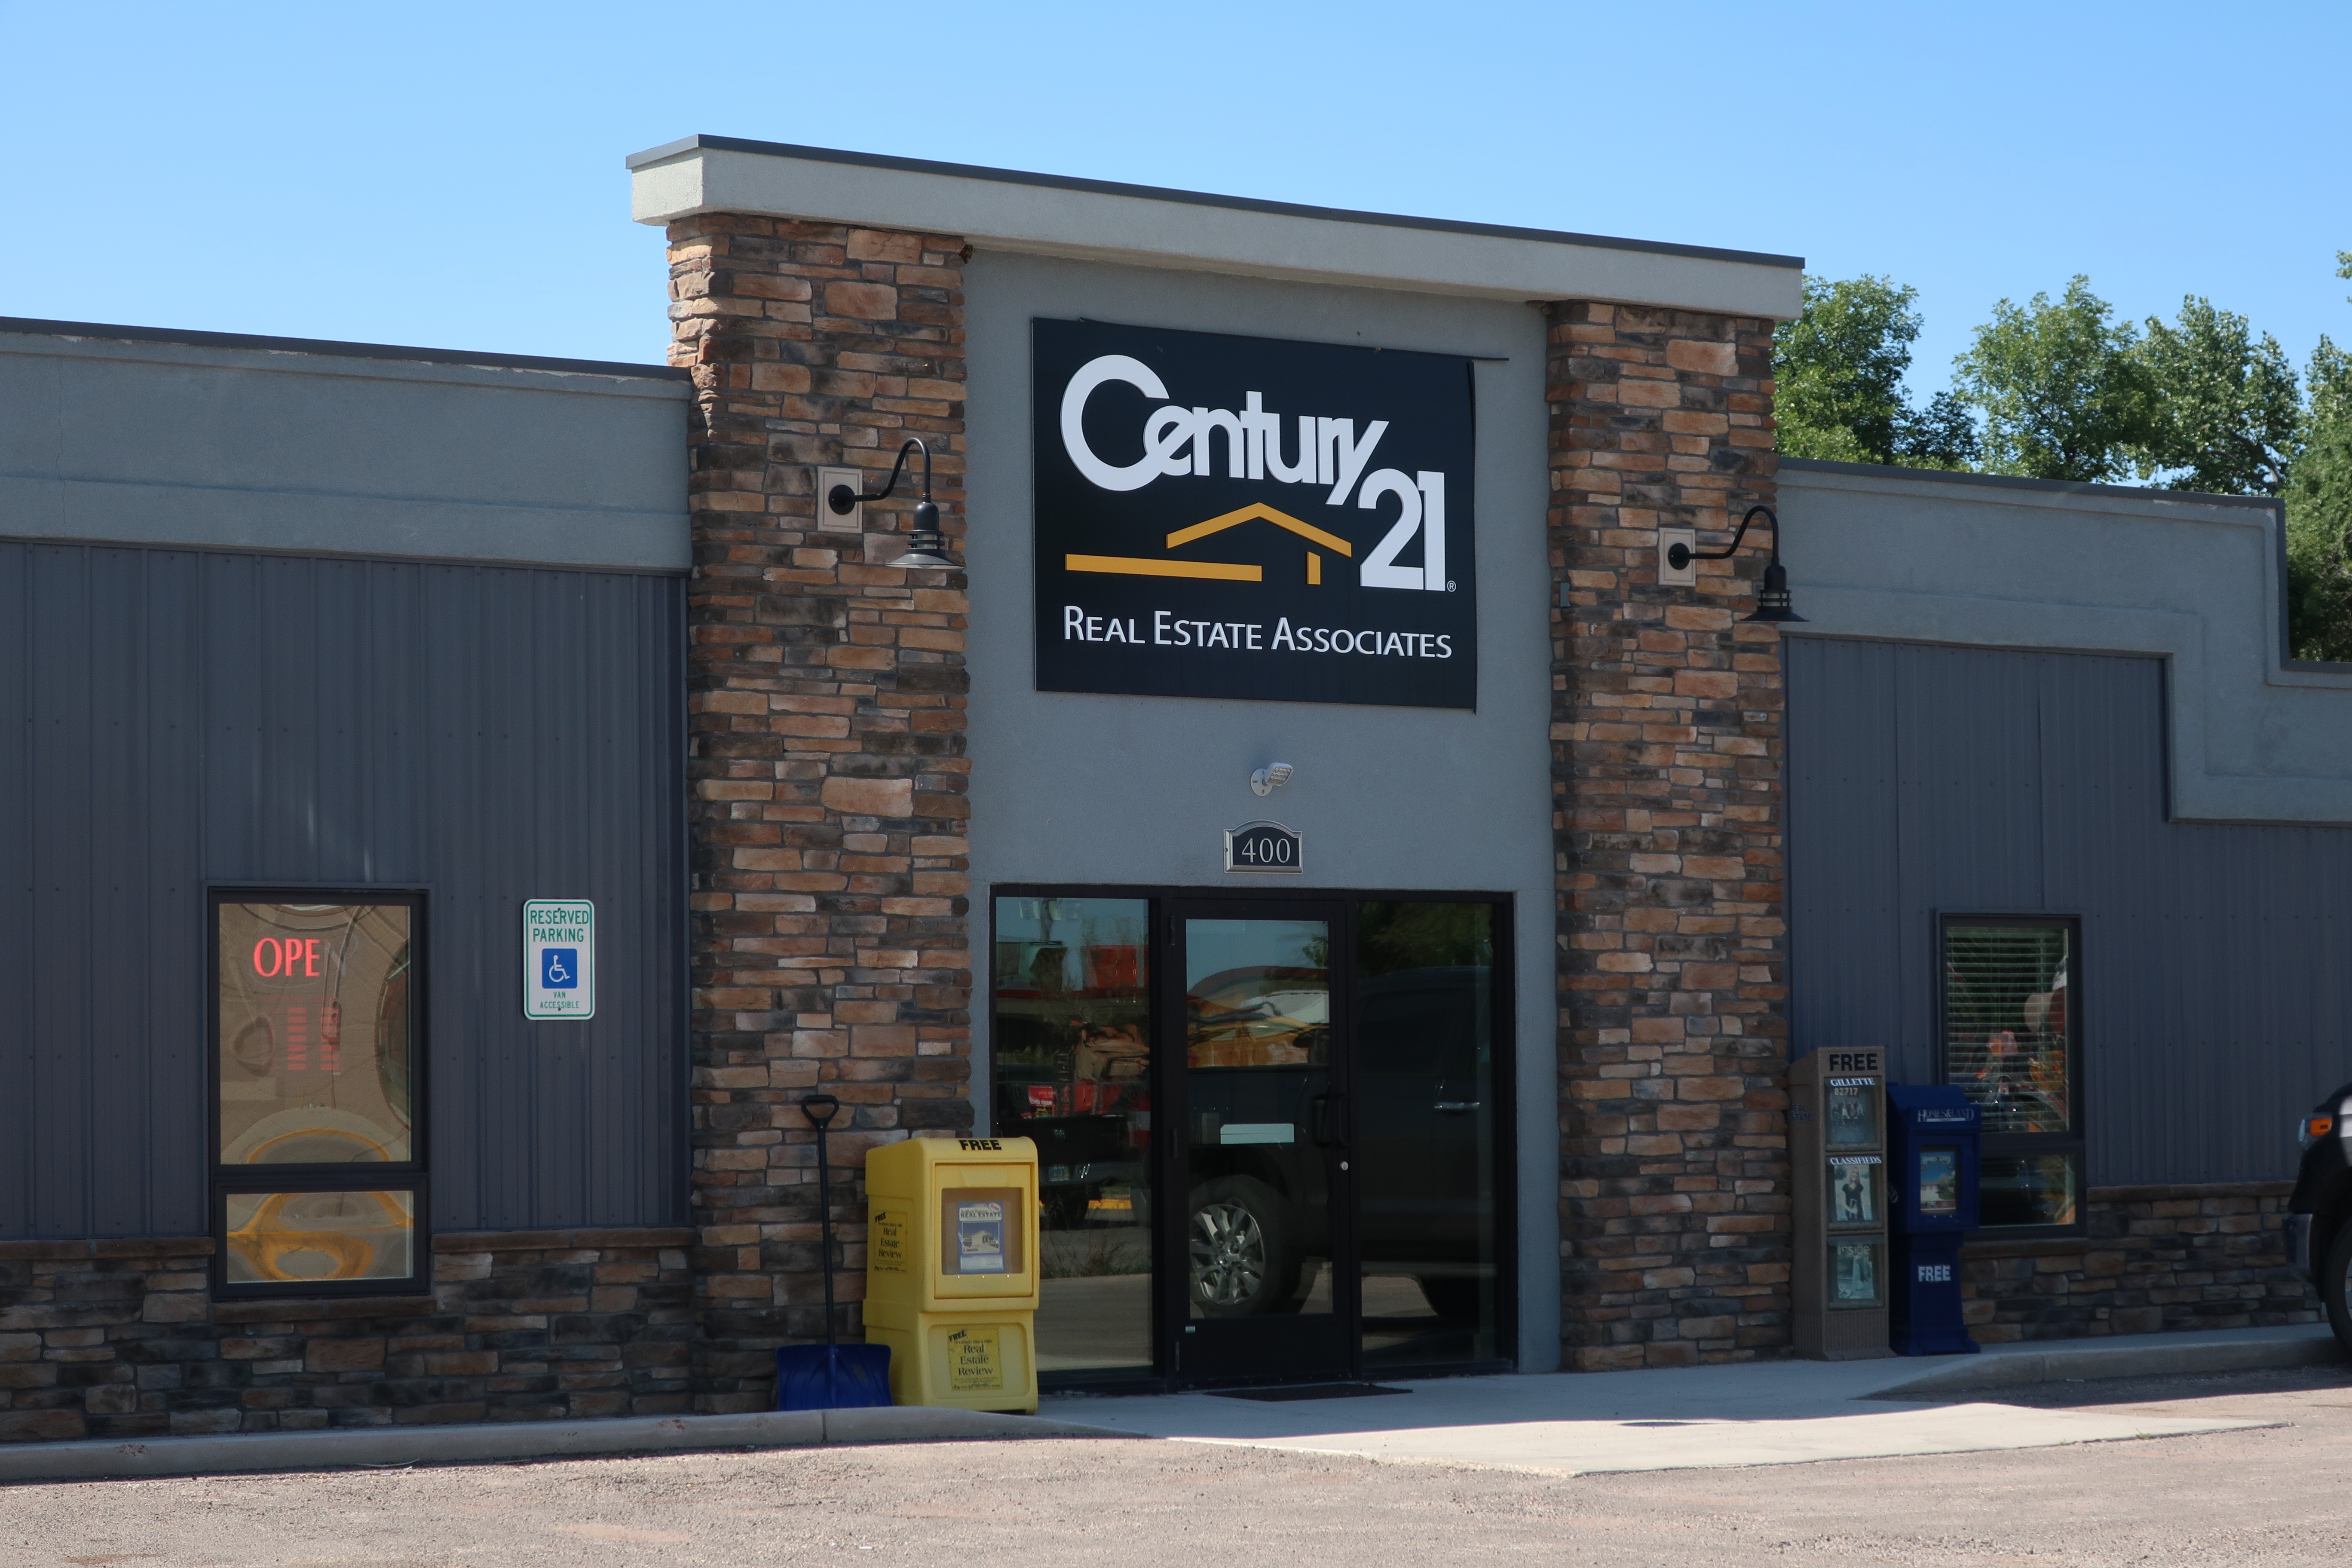 File:Century 21 Real Estate in Gillette, Wyoming.jpg - Wikimedia Commons